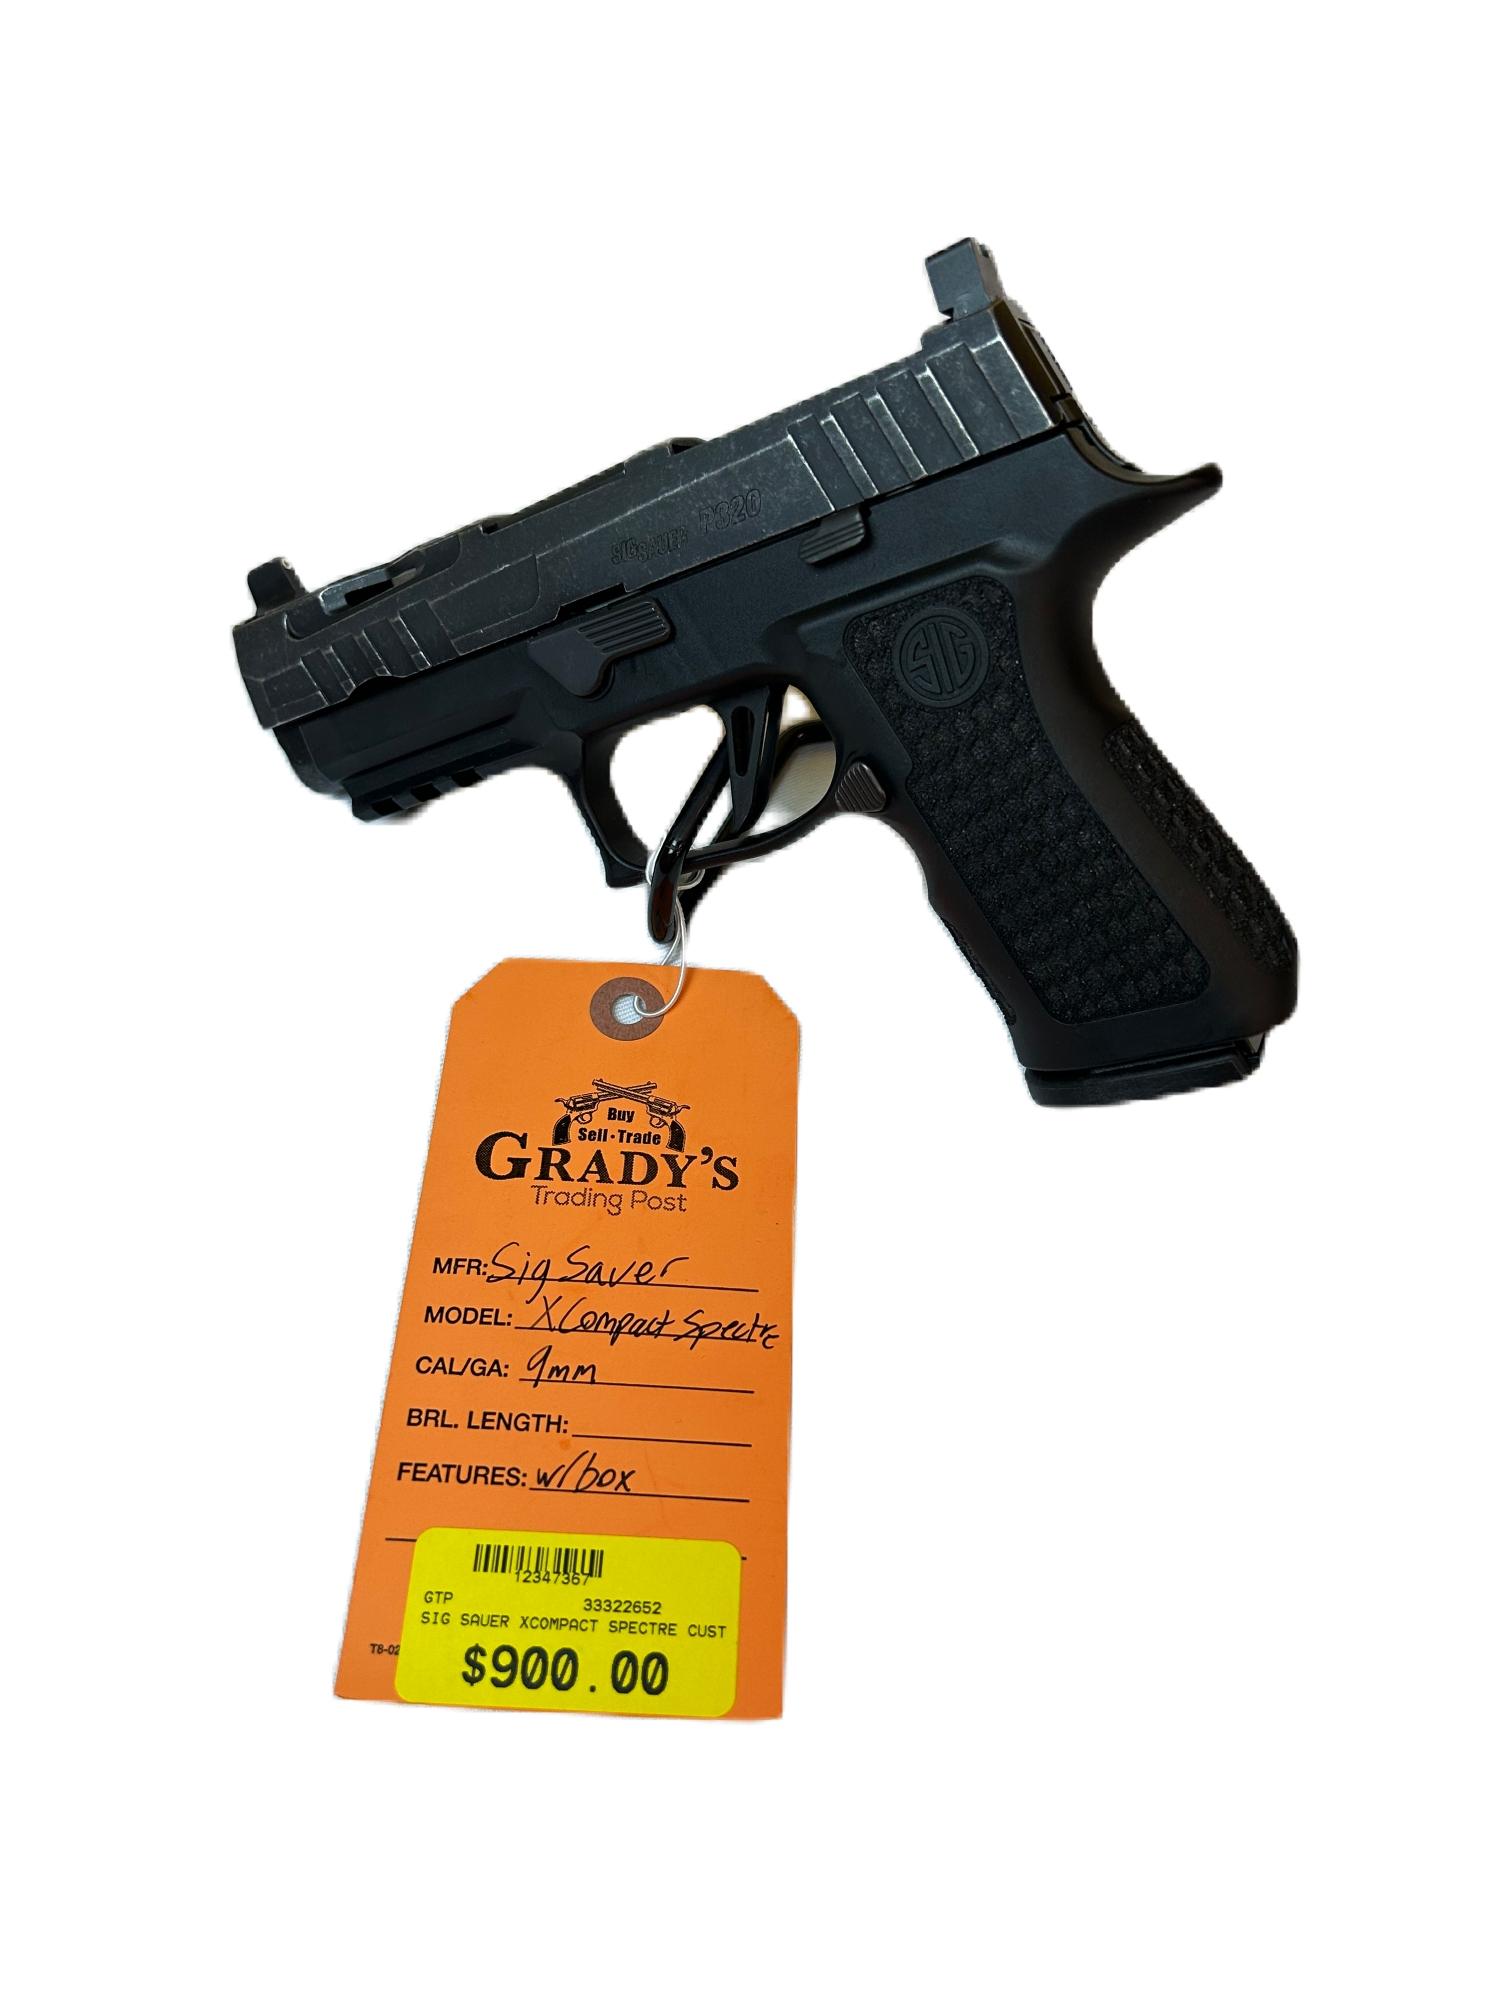 USED Sig Sauer P320 XCompact Spectre Custom Works 9mm with box  | 9 MM LUGER | 33322652 | 12347367